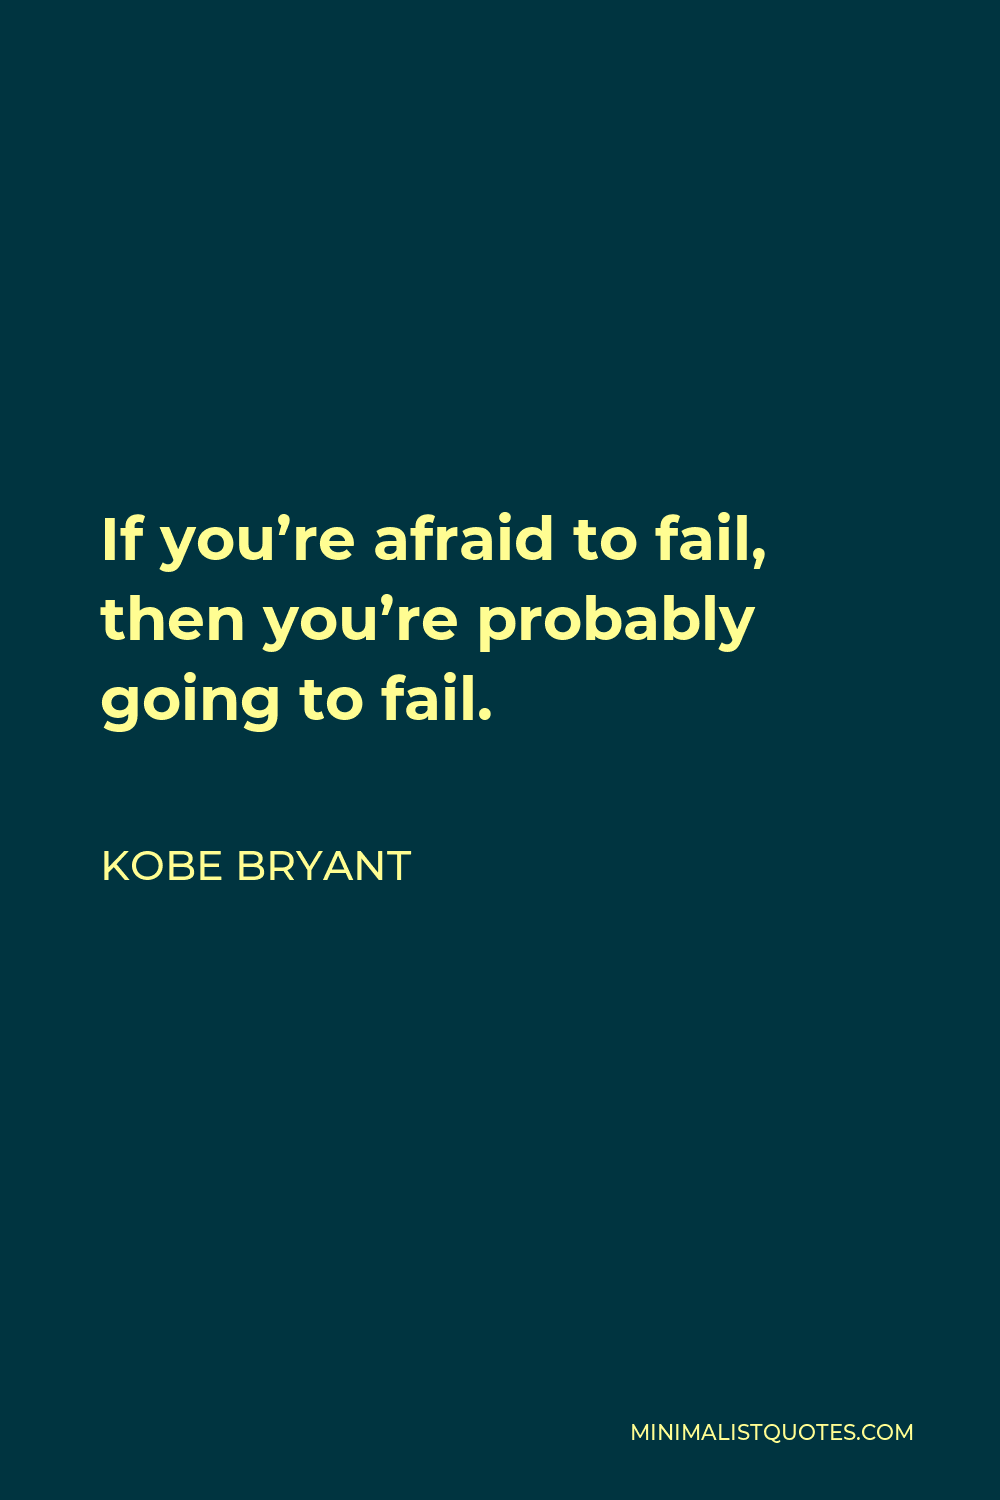 Kobe Bryant Quote - If you’re afraid to fail, then you’re probably going to fail.